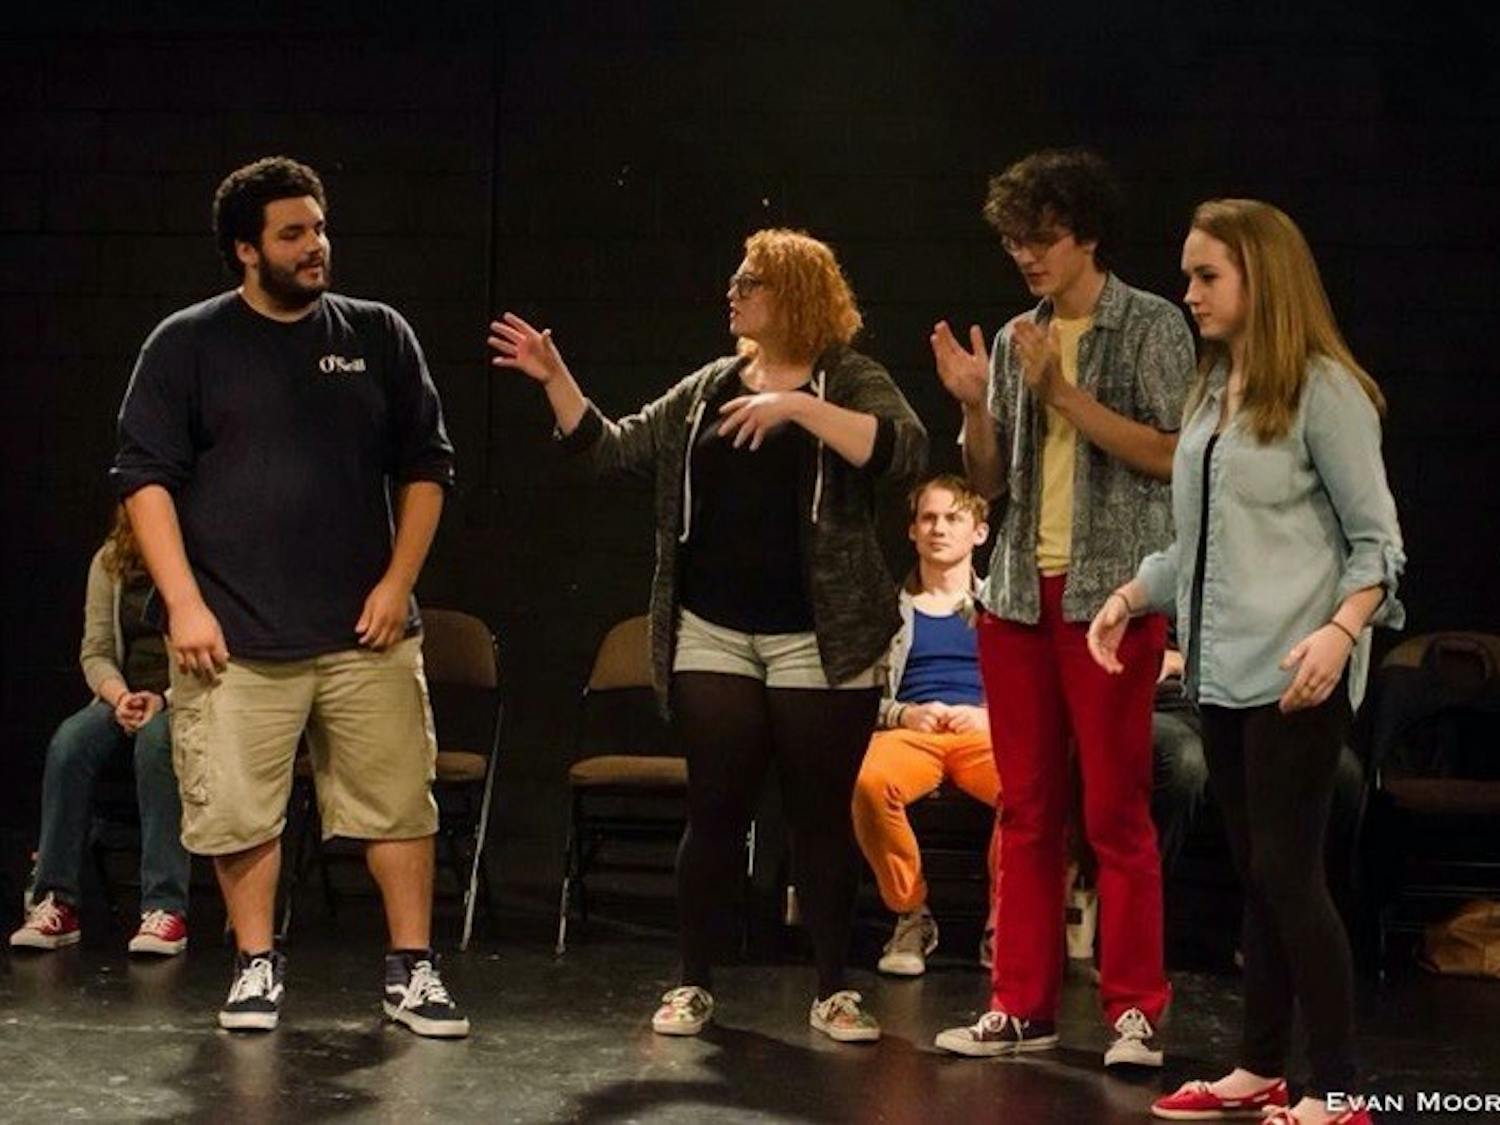 (Left to right) Steven Meeker, Nikki Solomon, Ben Folts and Kaylee Barrett during a show by Mainstage Improv Troupe in Fall 2015.